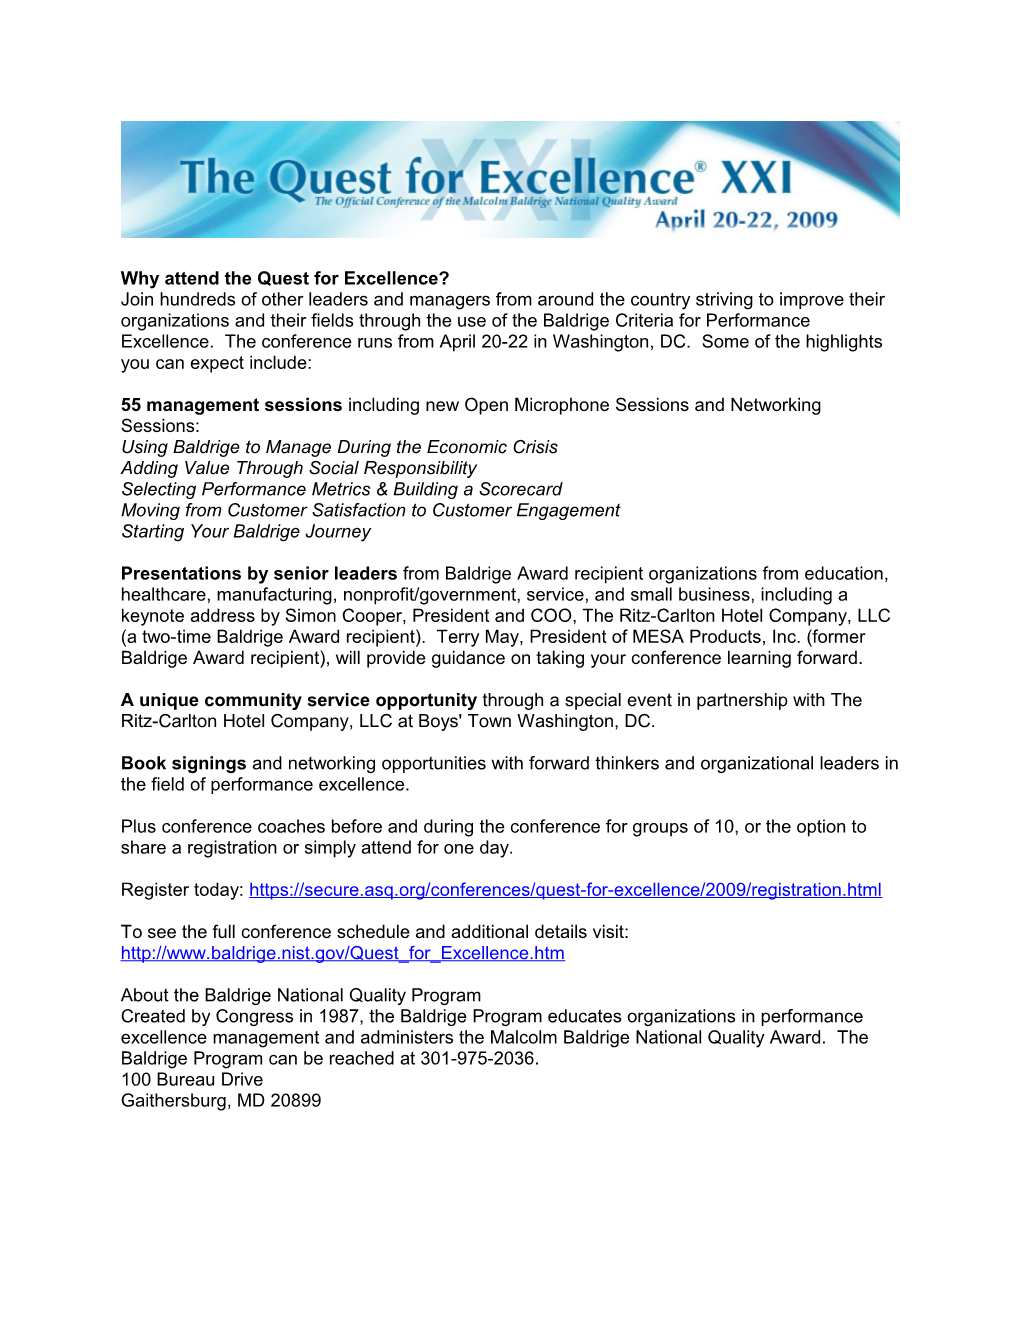 Why Attend the Quest for Excellence? Join Hundreds of Other Leaders and Managers From